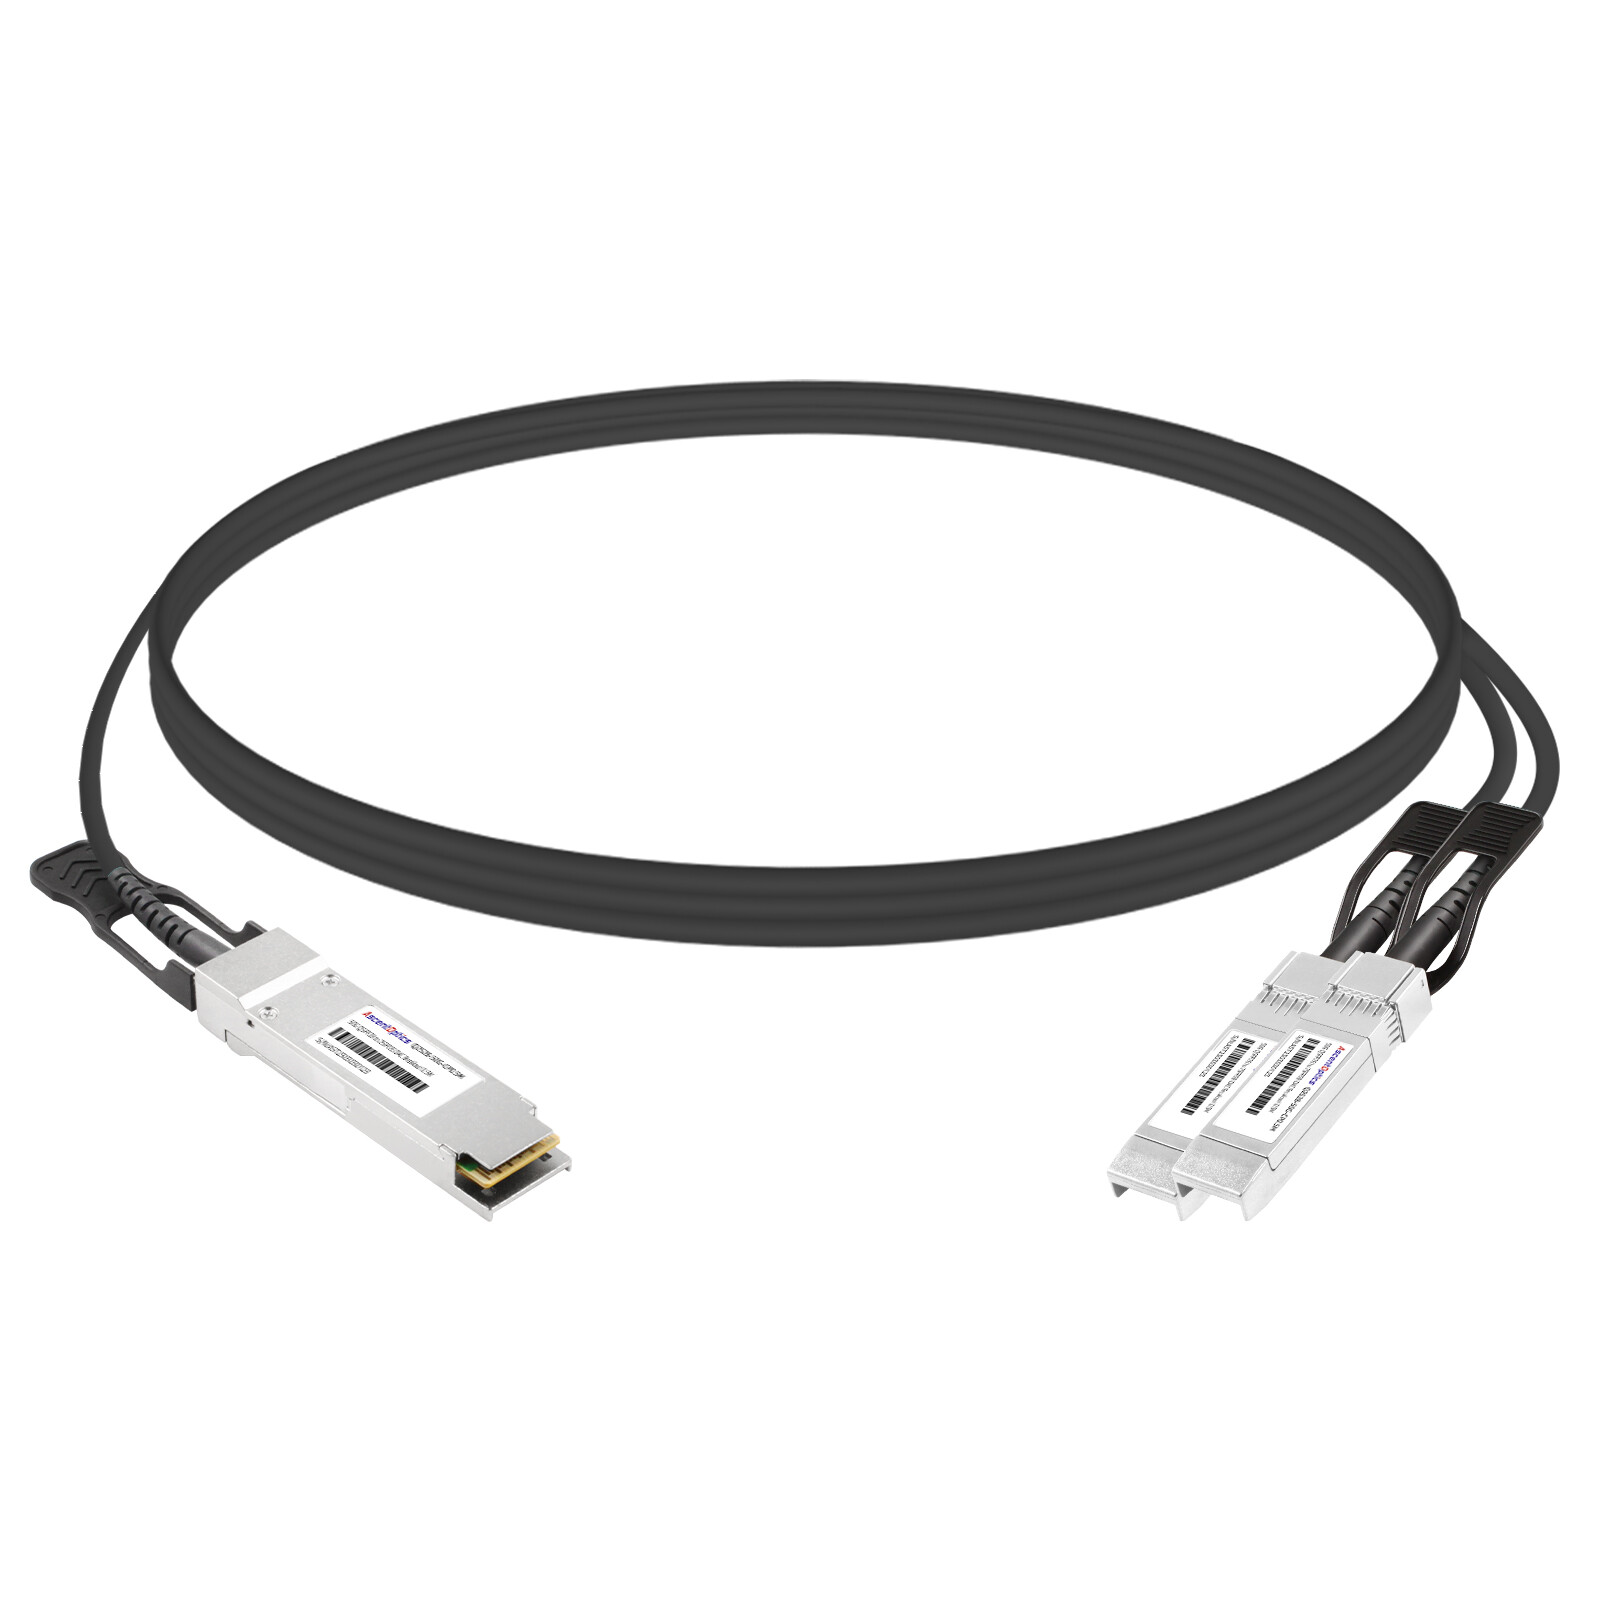 50G DSFP to 2x 25G SFP28 Copper Breakout Cable,2 Meters,Passive